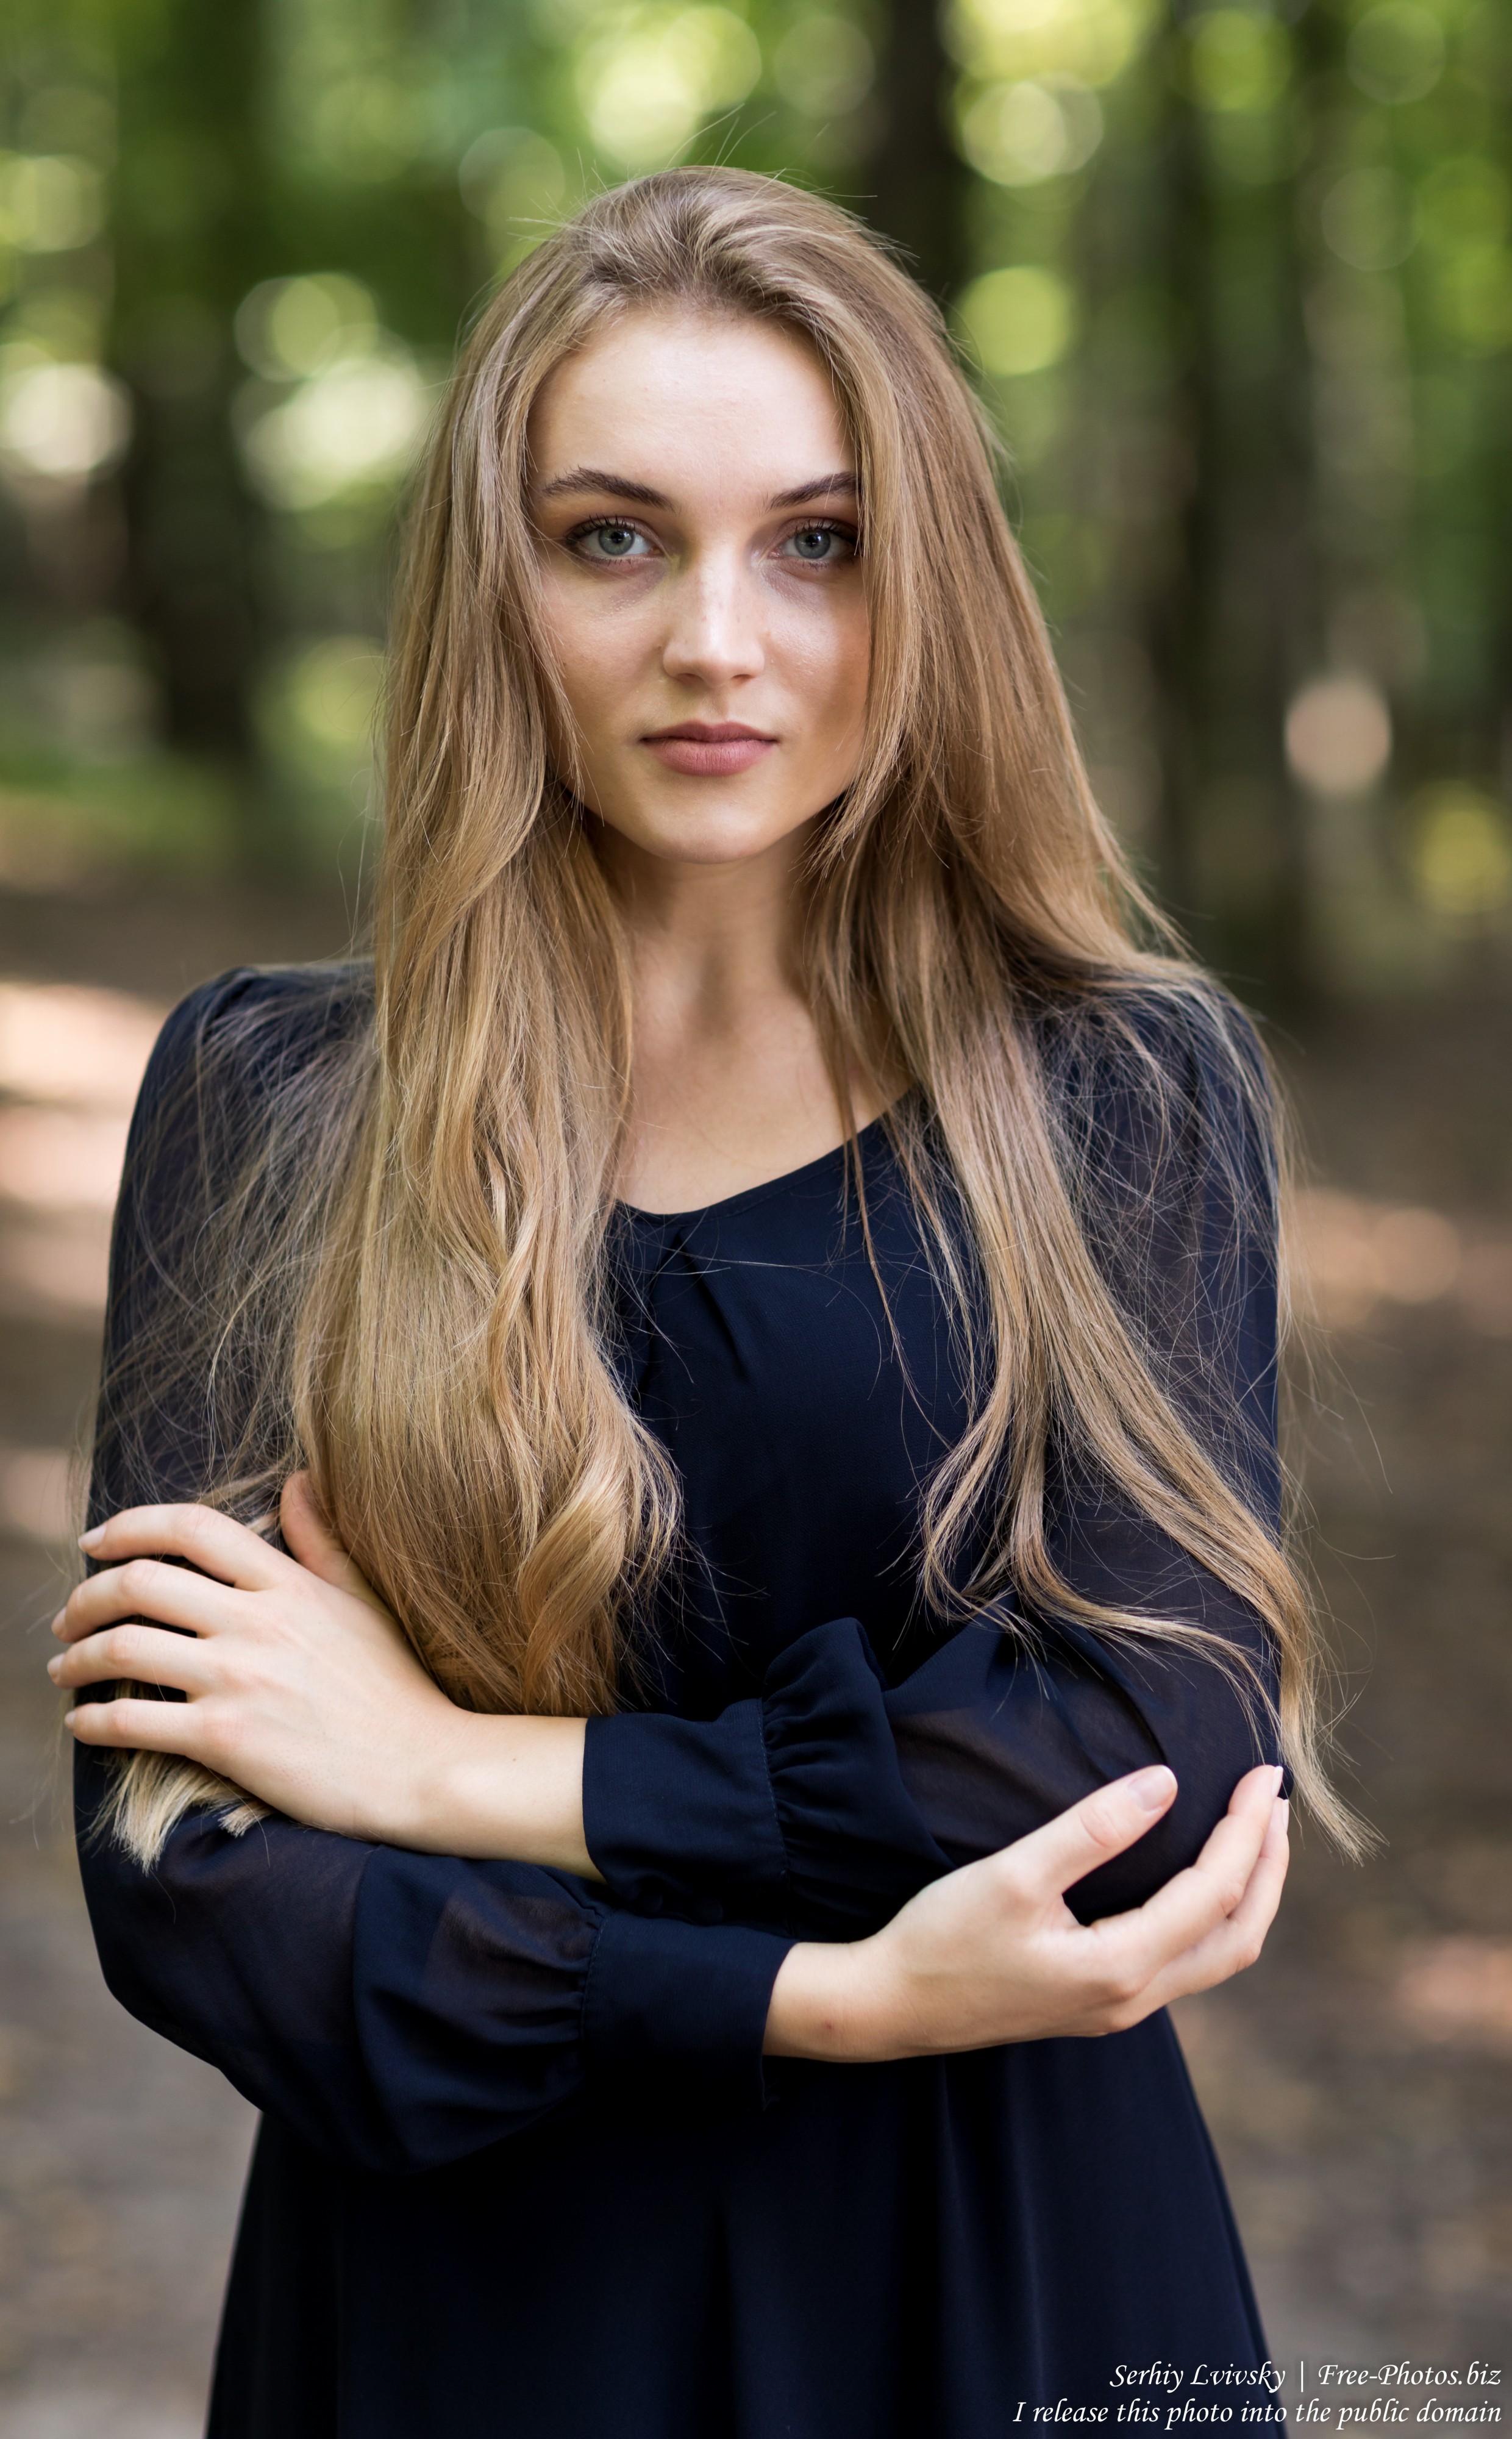 Yaryna - a 21-year-old natural blonde Catholic girl photographed in August 2019 by Serhiy Lvivsky, picture 35